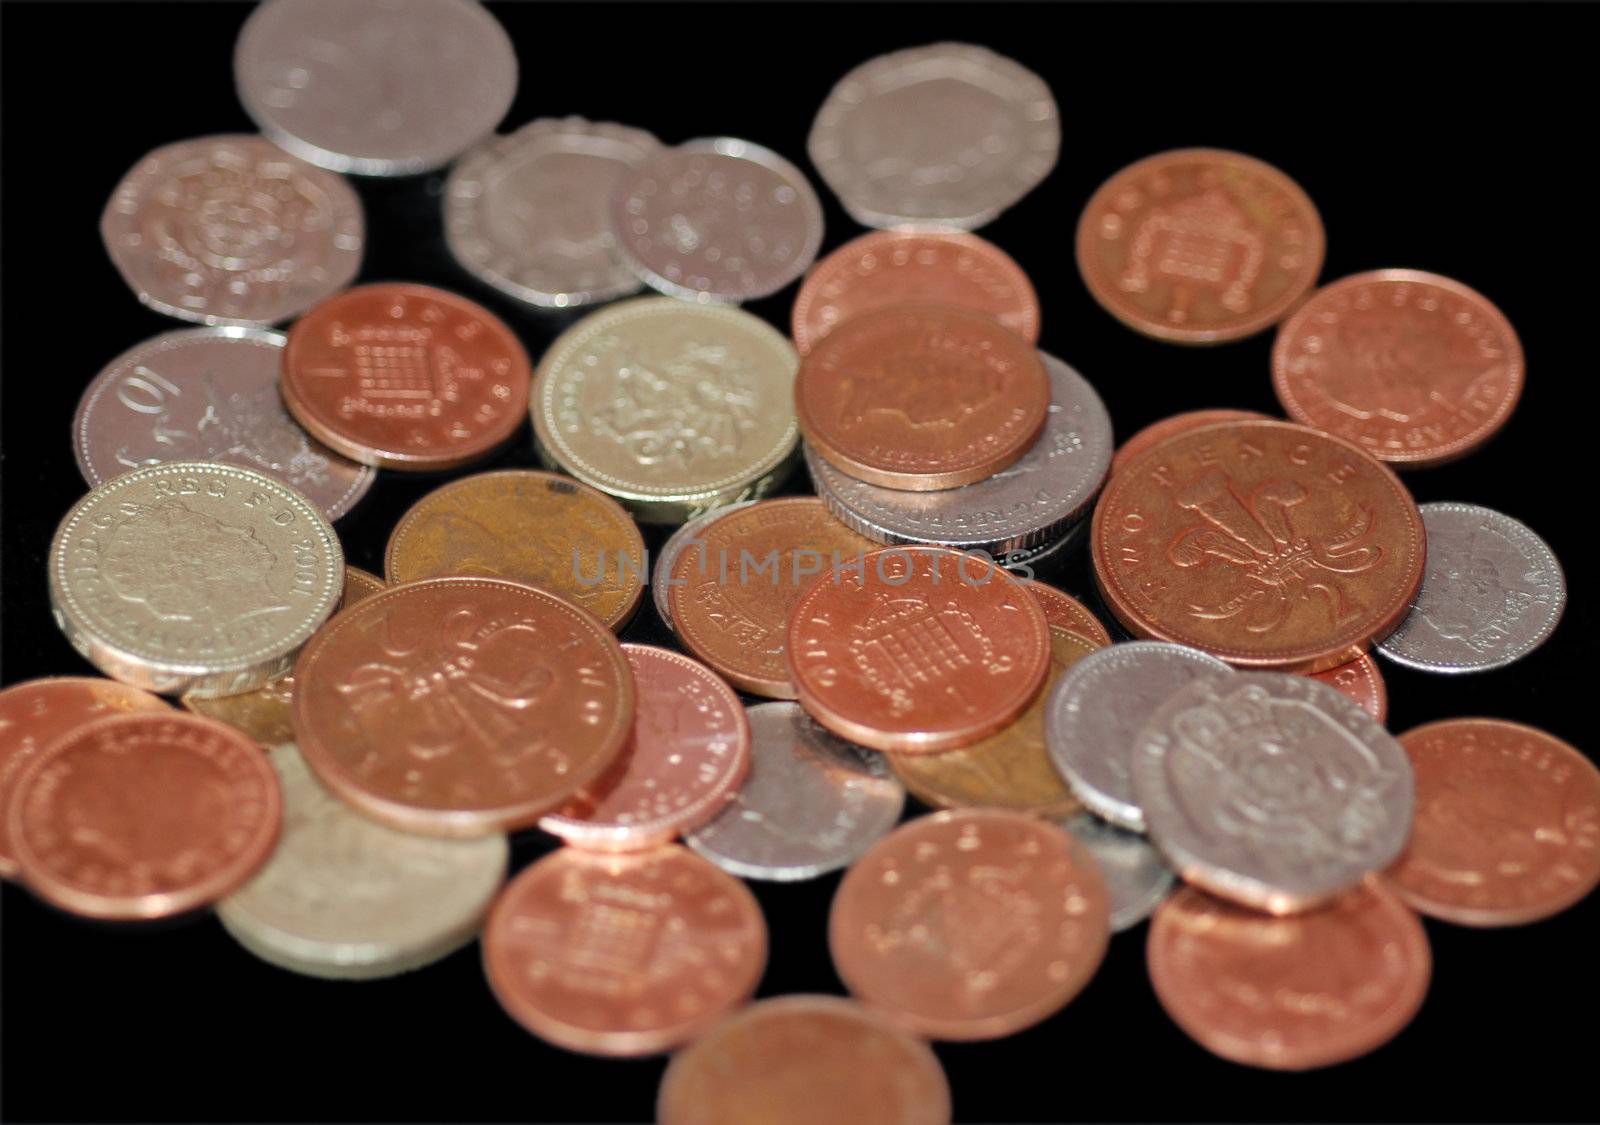 A selection of British coins, from a penny to a pound